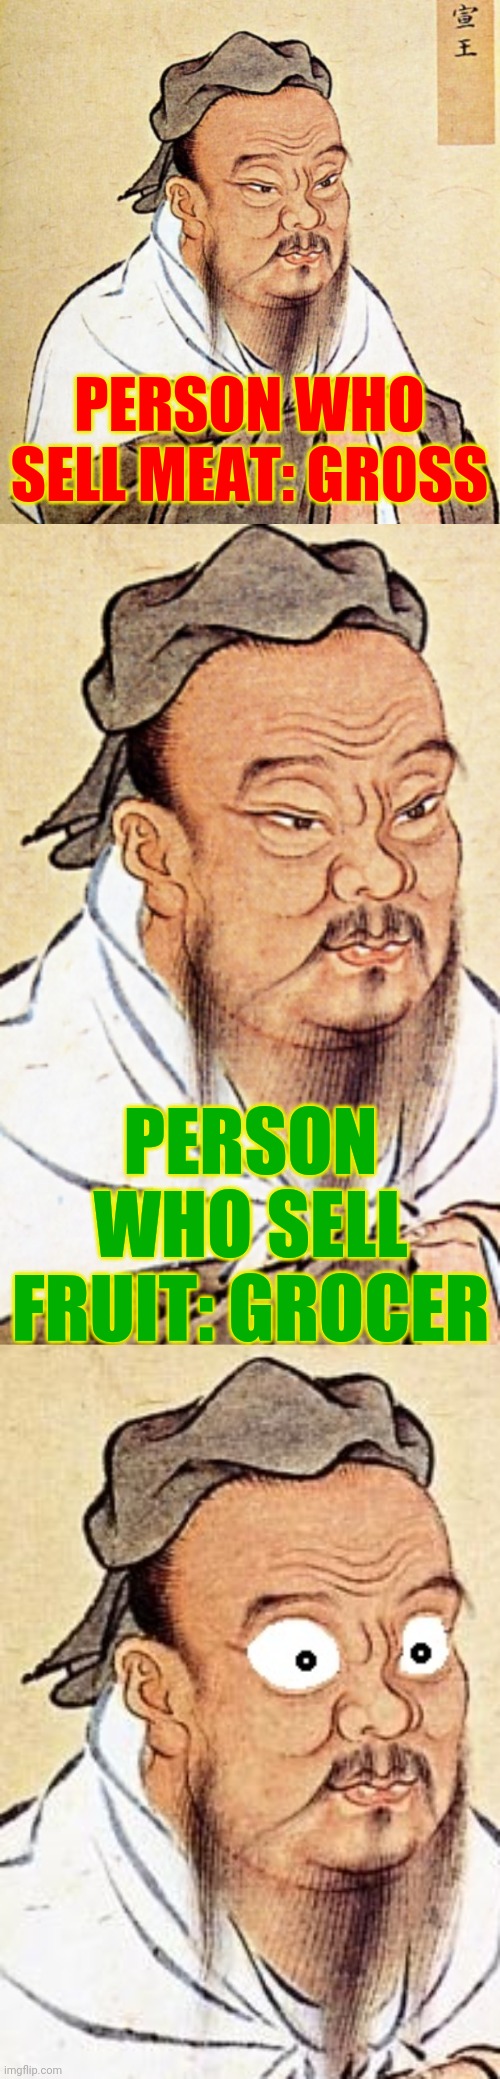 Clogged sebaceous gland: grow cyst | PERSON WHO SELL MEAT: GROSS; PERSON WHO SELL FRUIT: GROCER | image tagged in confucius,confucius says,confucius wide-eyed,memes,bad puns,the title is grossest too | made w/ Imgflip meme maker